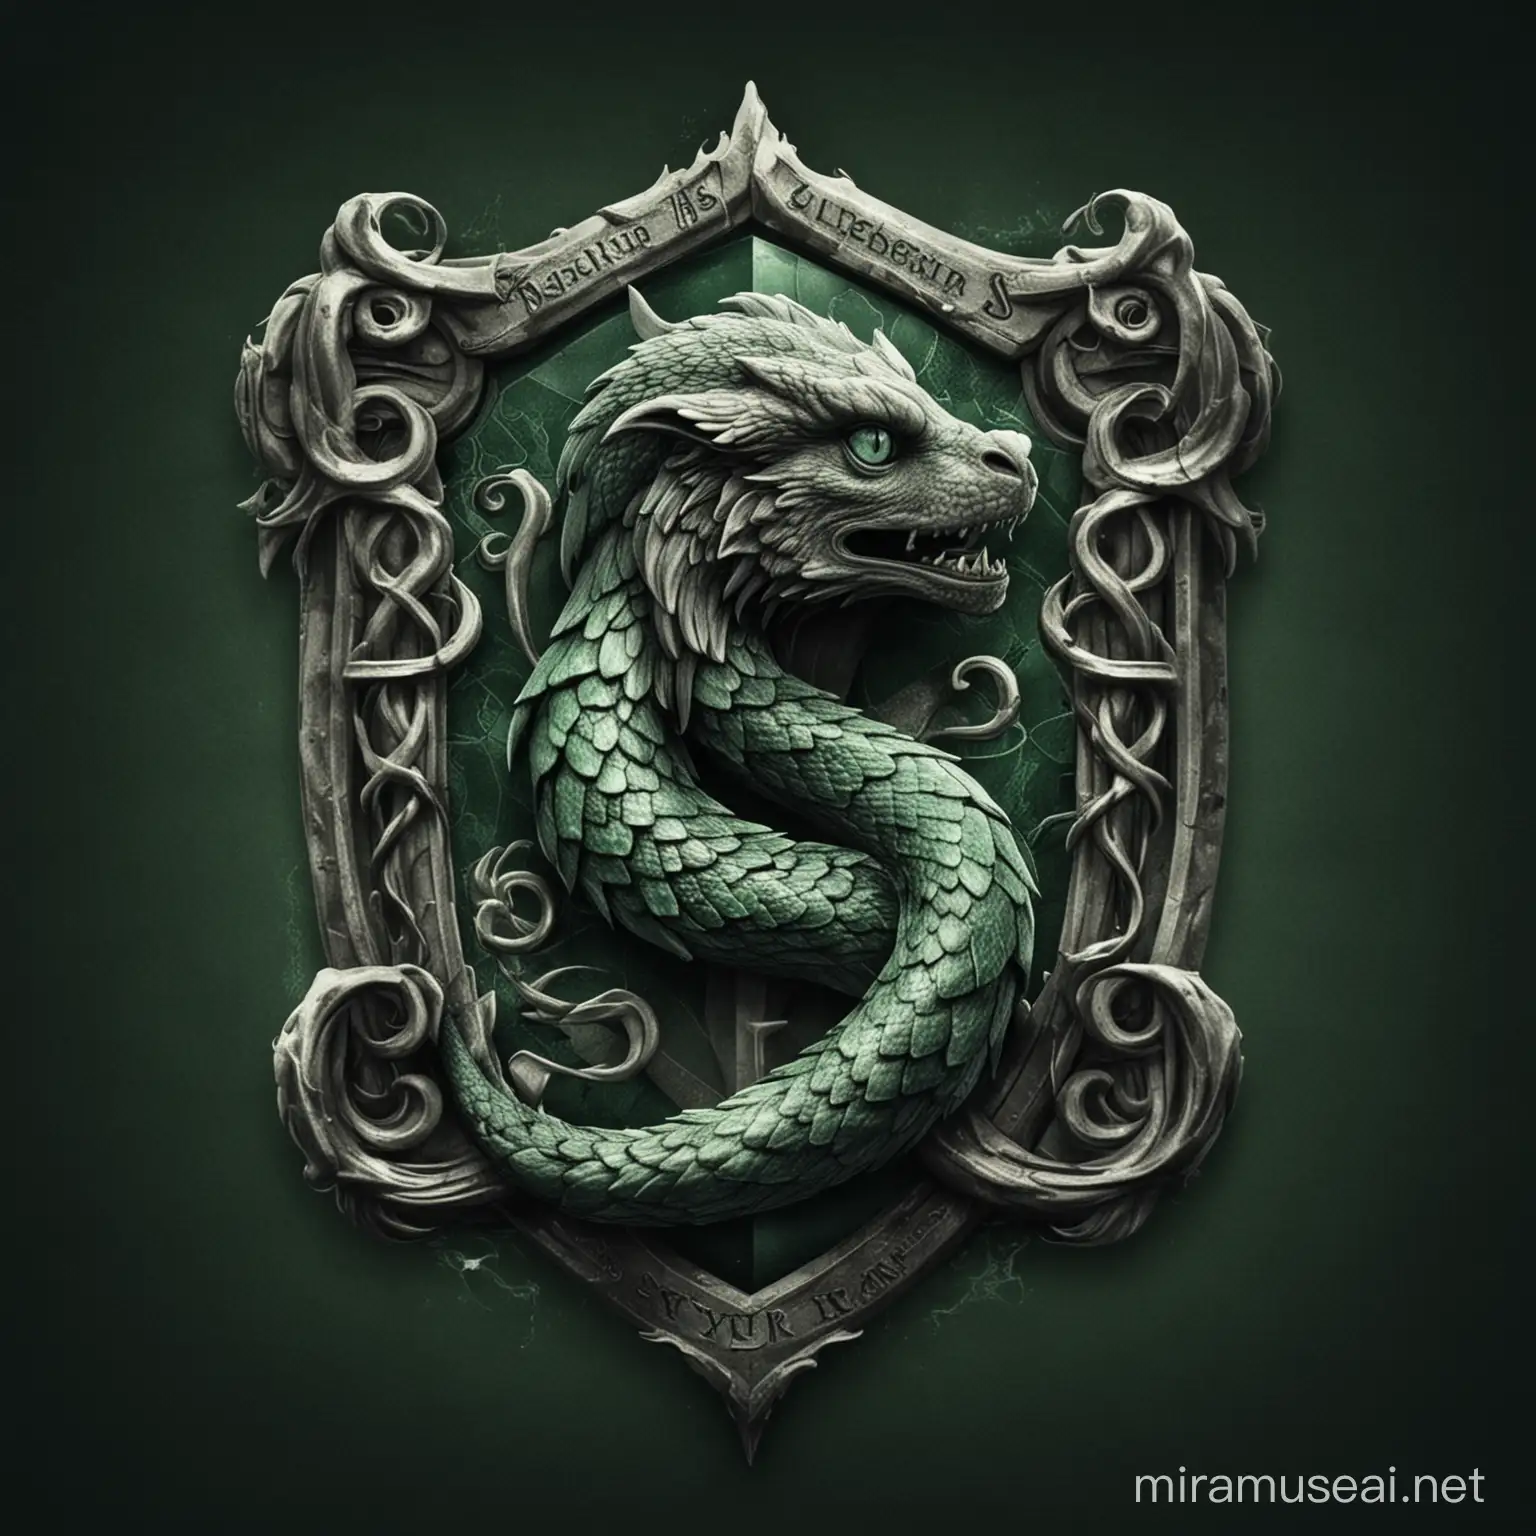 Slytherin Logo Serpentine Emblem of Ambition and Cunning